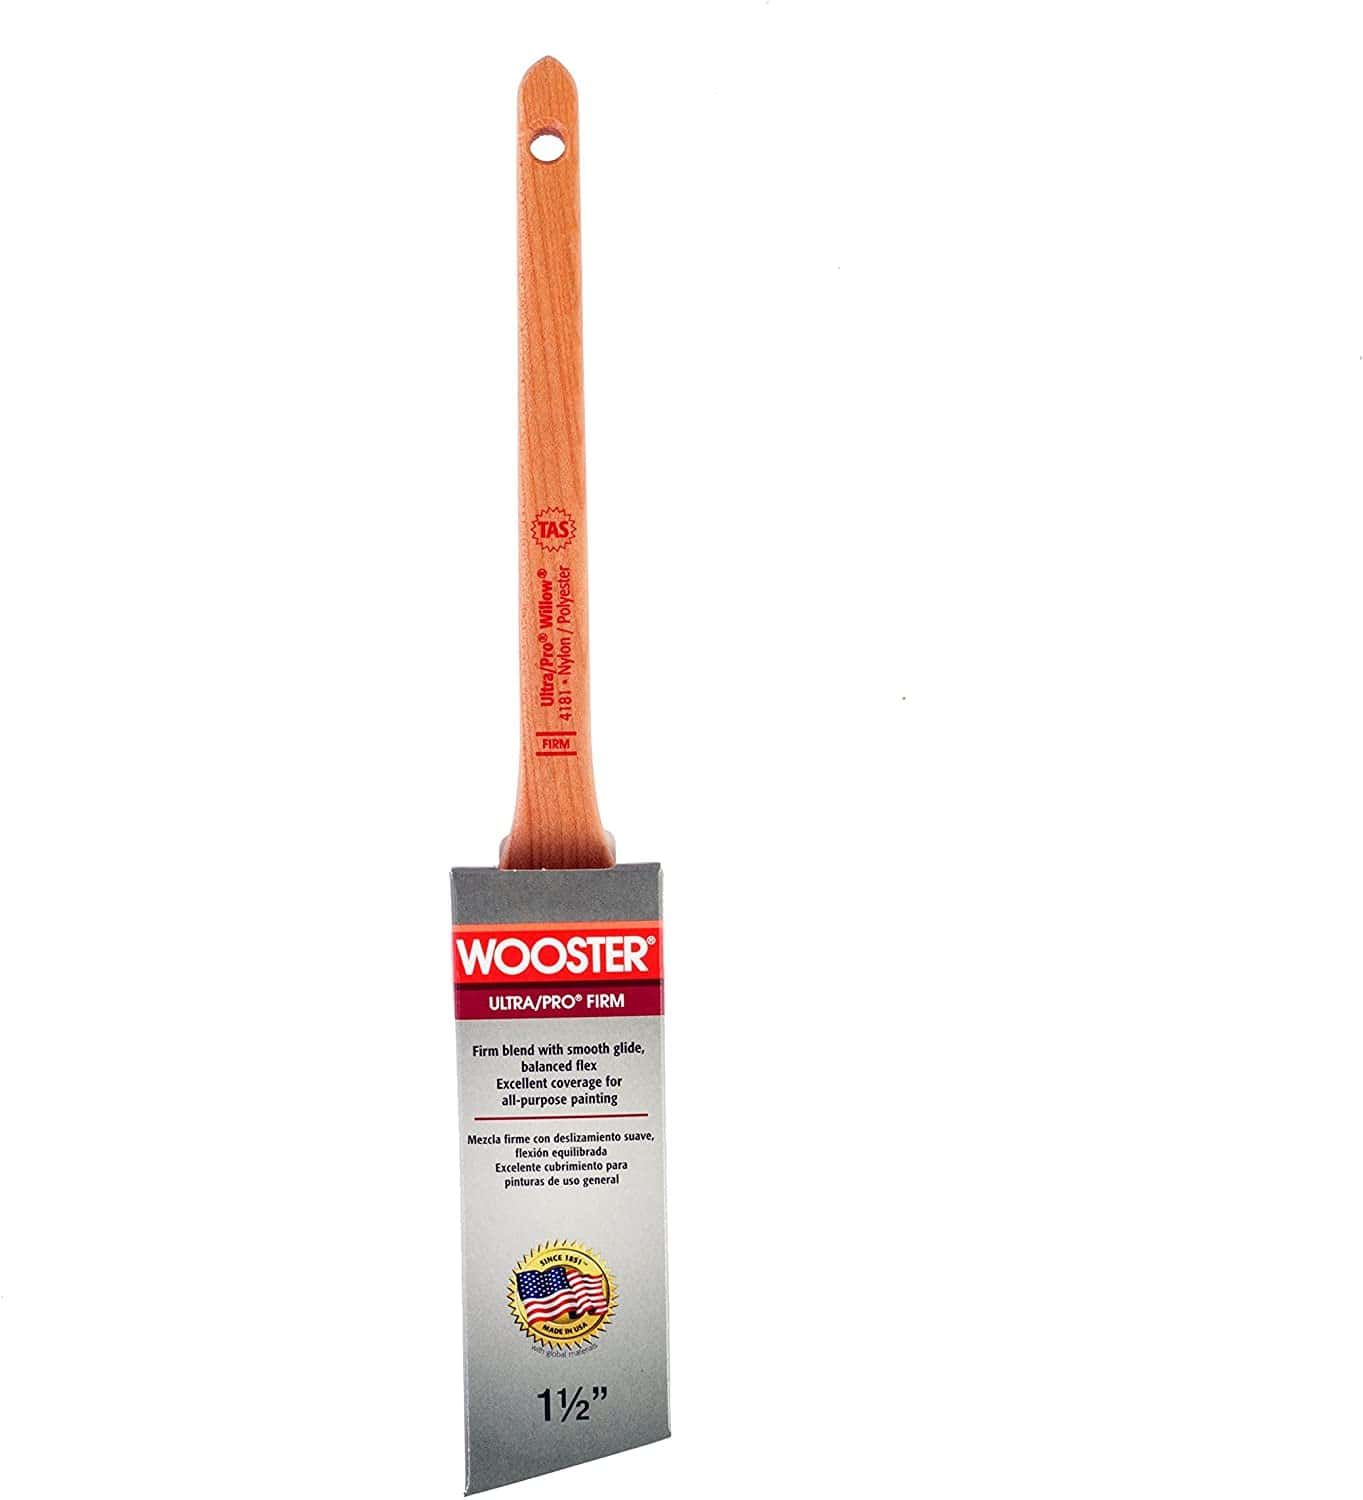 Wooster Ultra/Pro Firm Willow Thin Angle Sash Paintbrush